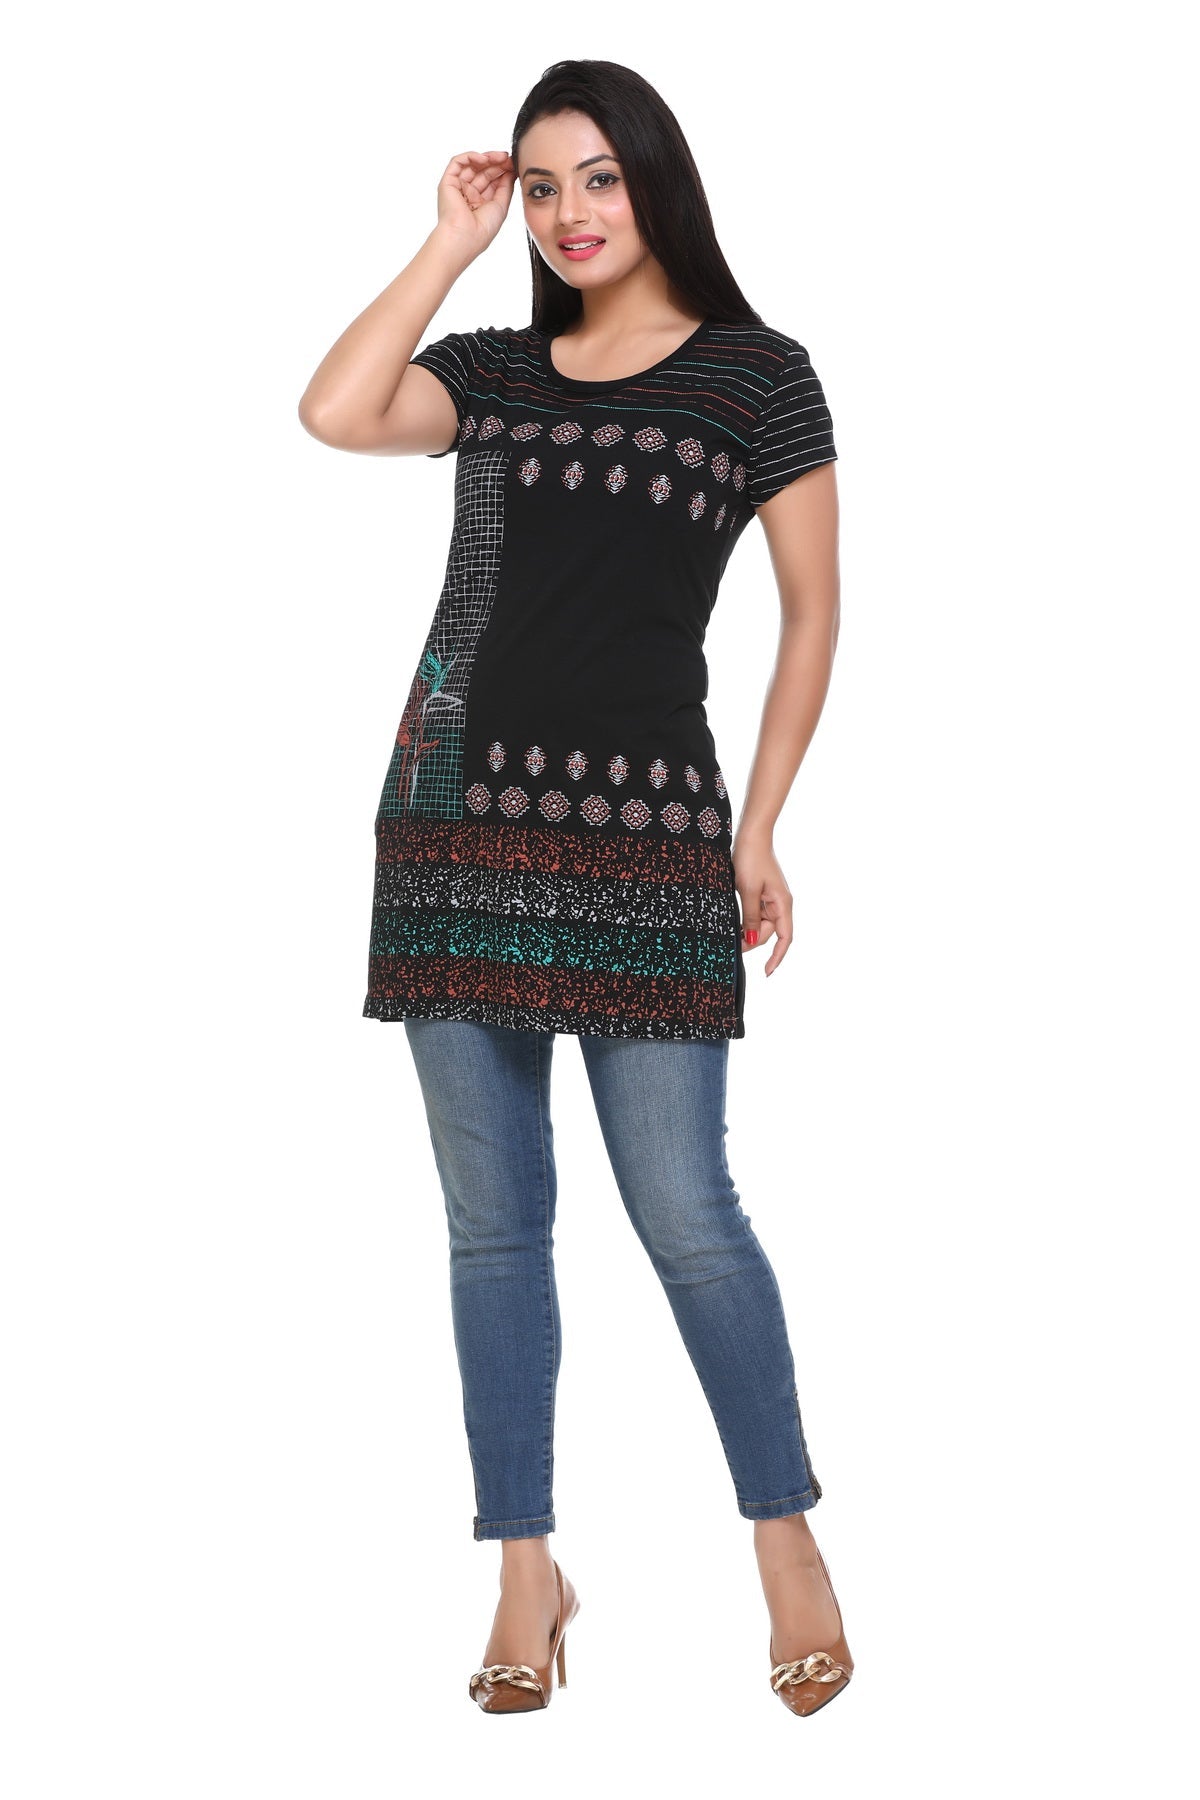 Cotton Printed Long t-Shirts For Women in Half Sleeve -Multicolor At Best Prices